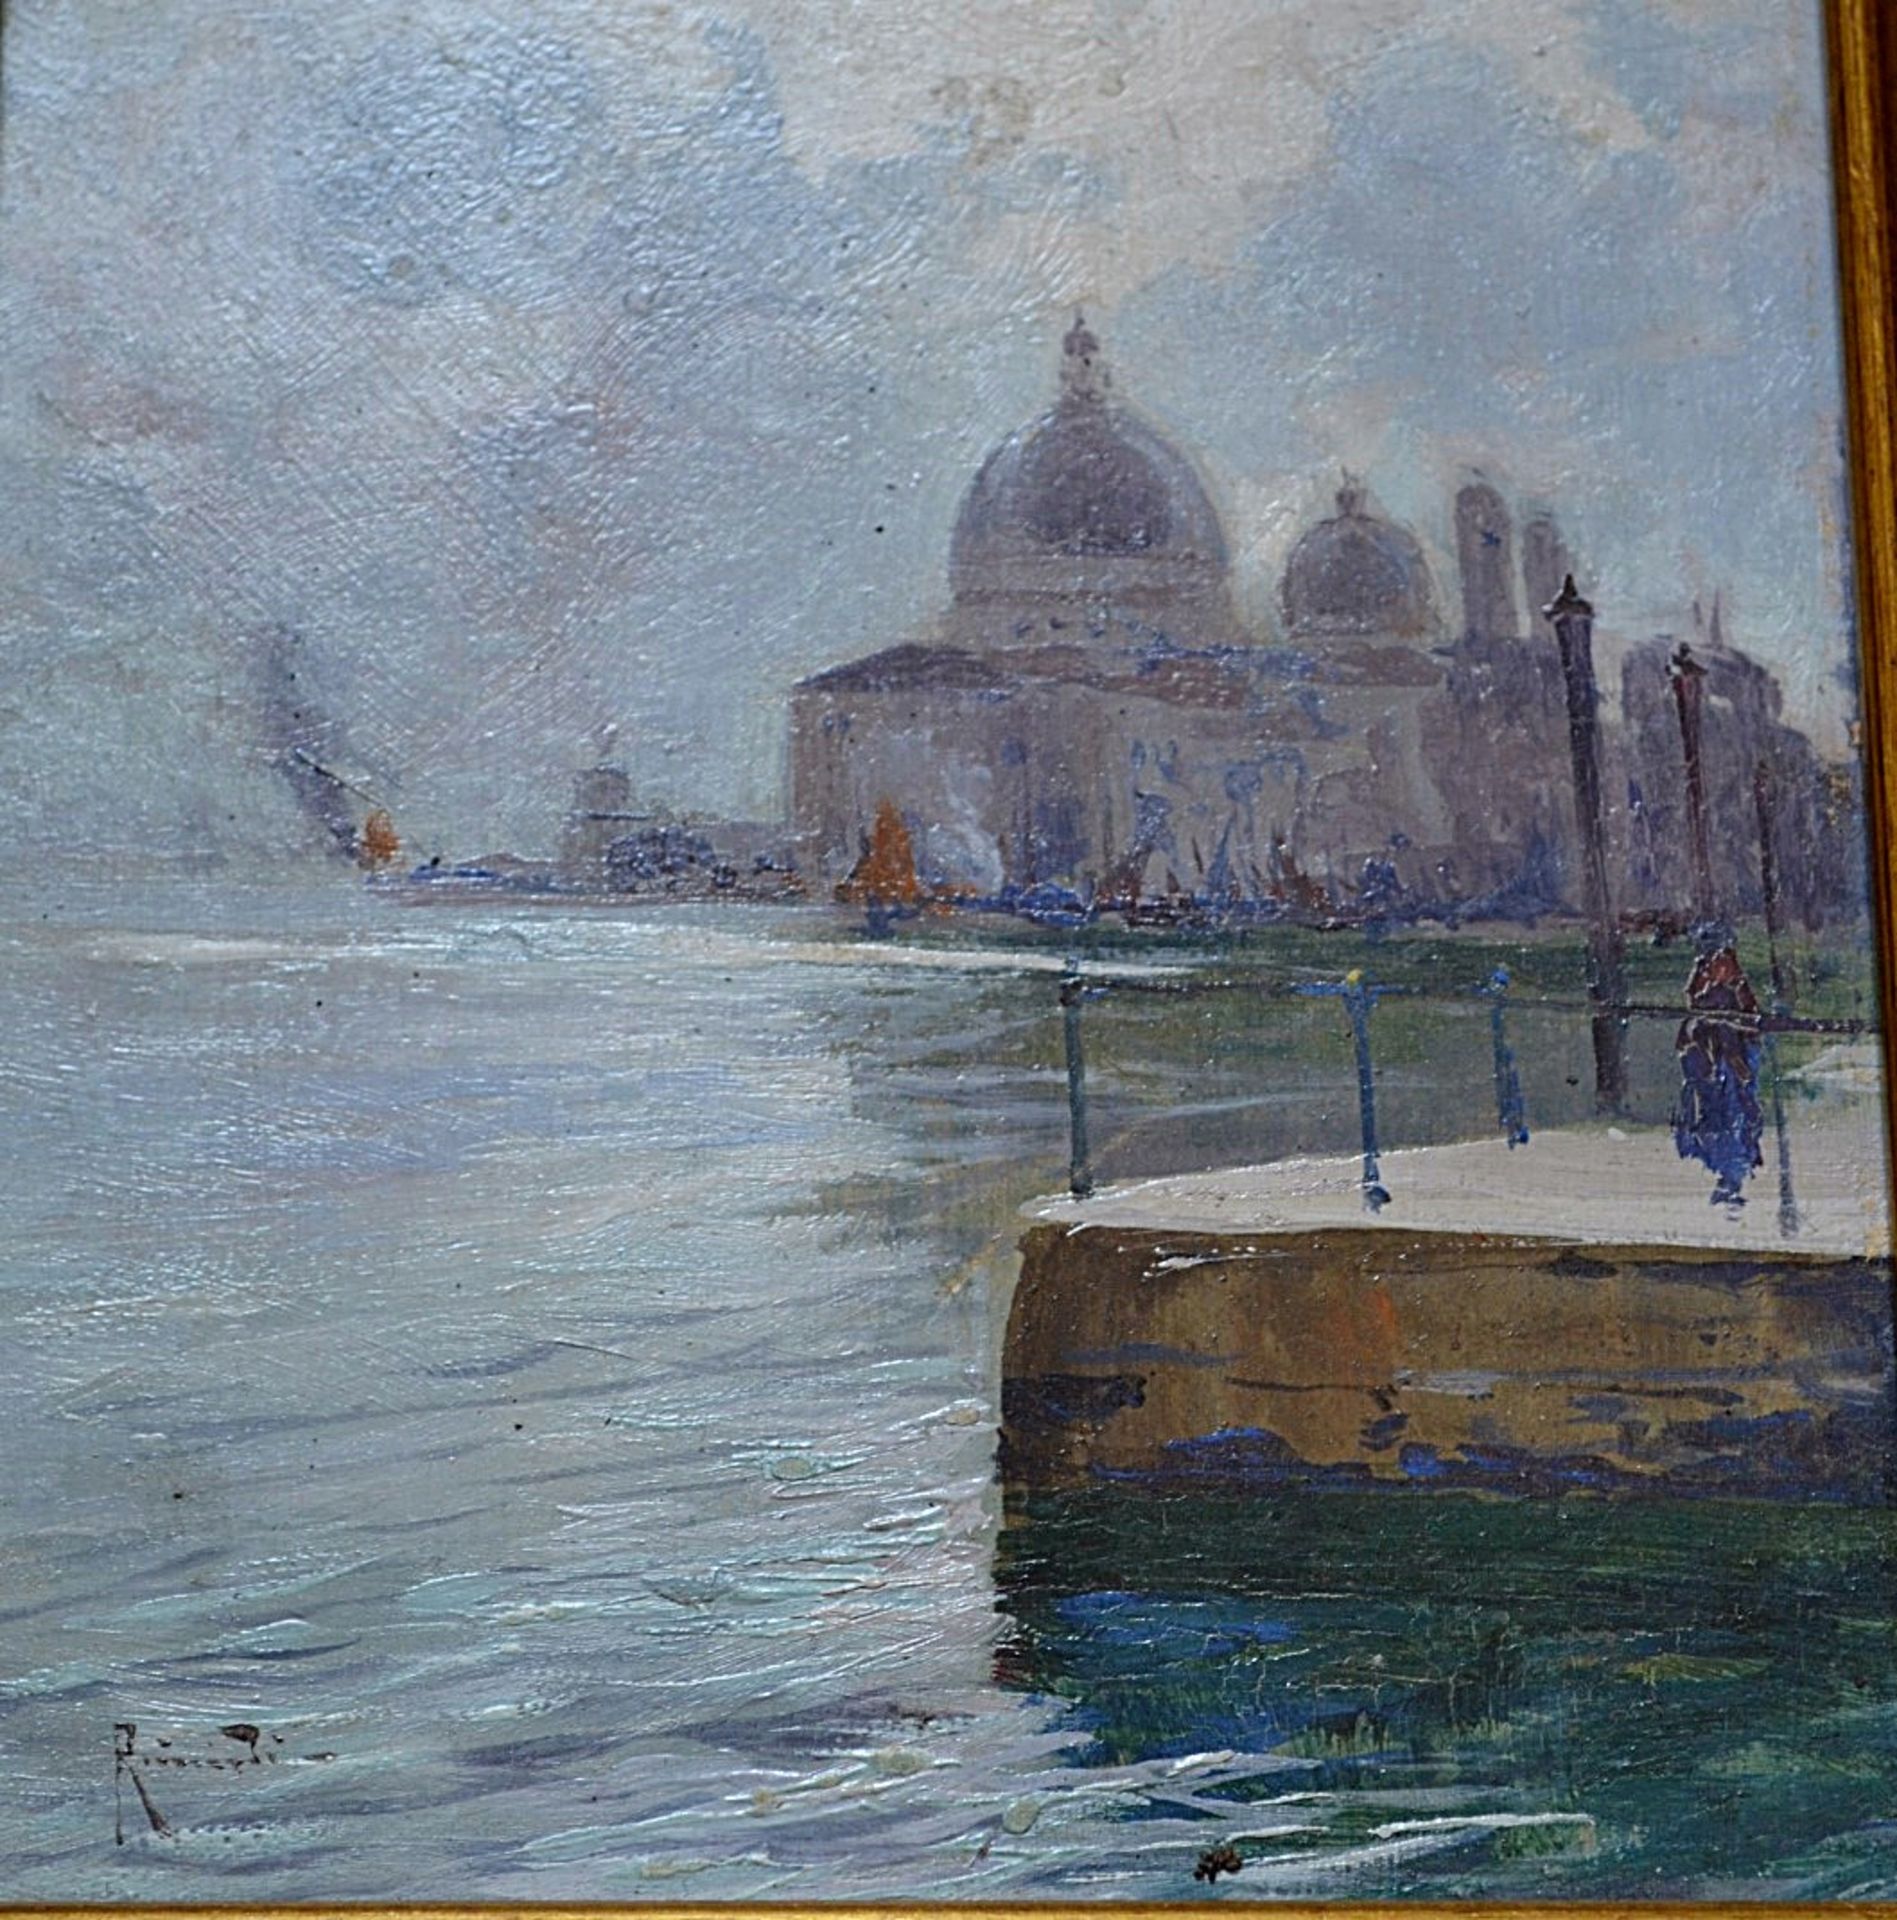 1 x Original Oil Painting By F. Rinaldi, Depicting A Venetian Scene - 19th Century - From A Grade II - Image 2 of 3